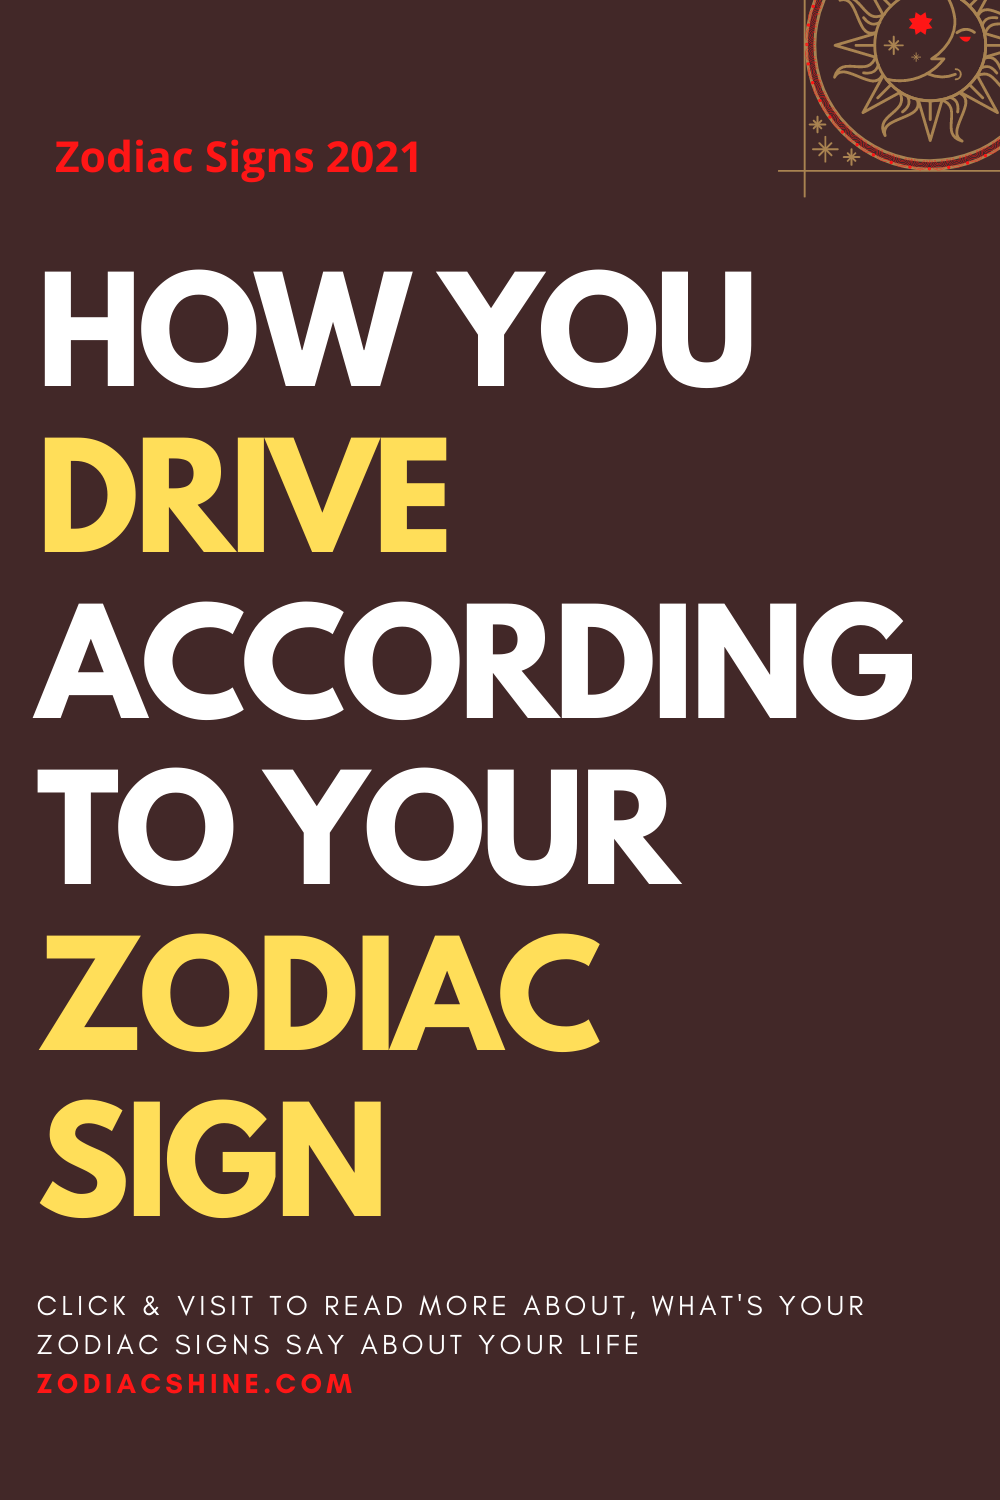 HOW YOU DRIVE ACCORDING TO YOUR ZODIAC SIGN